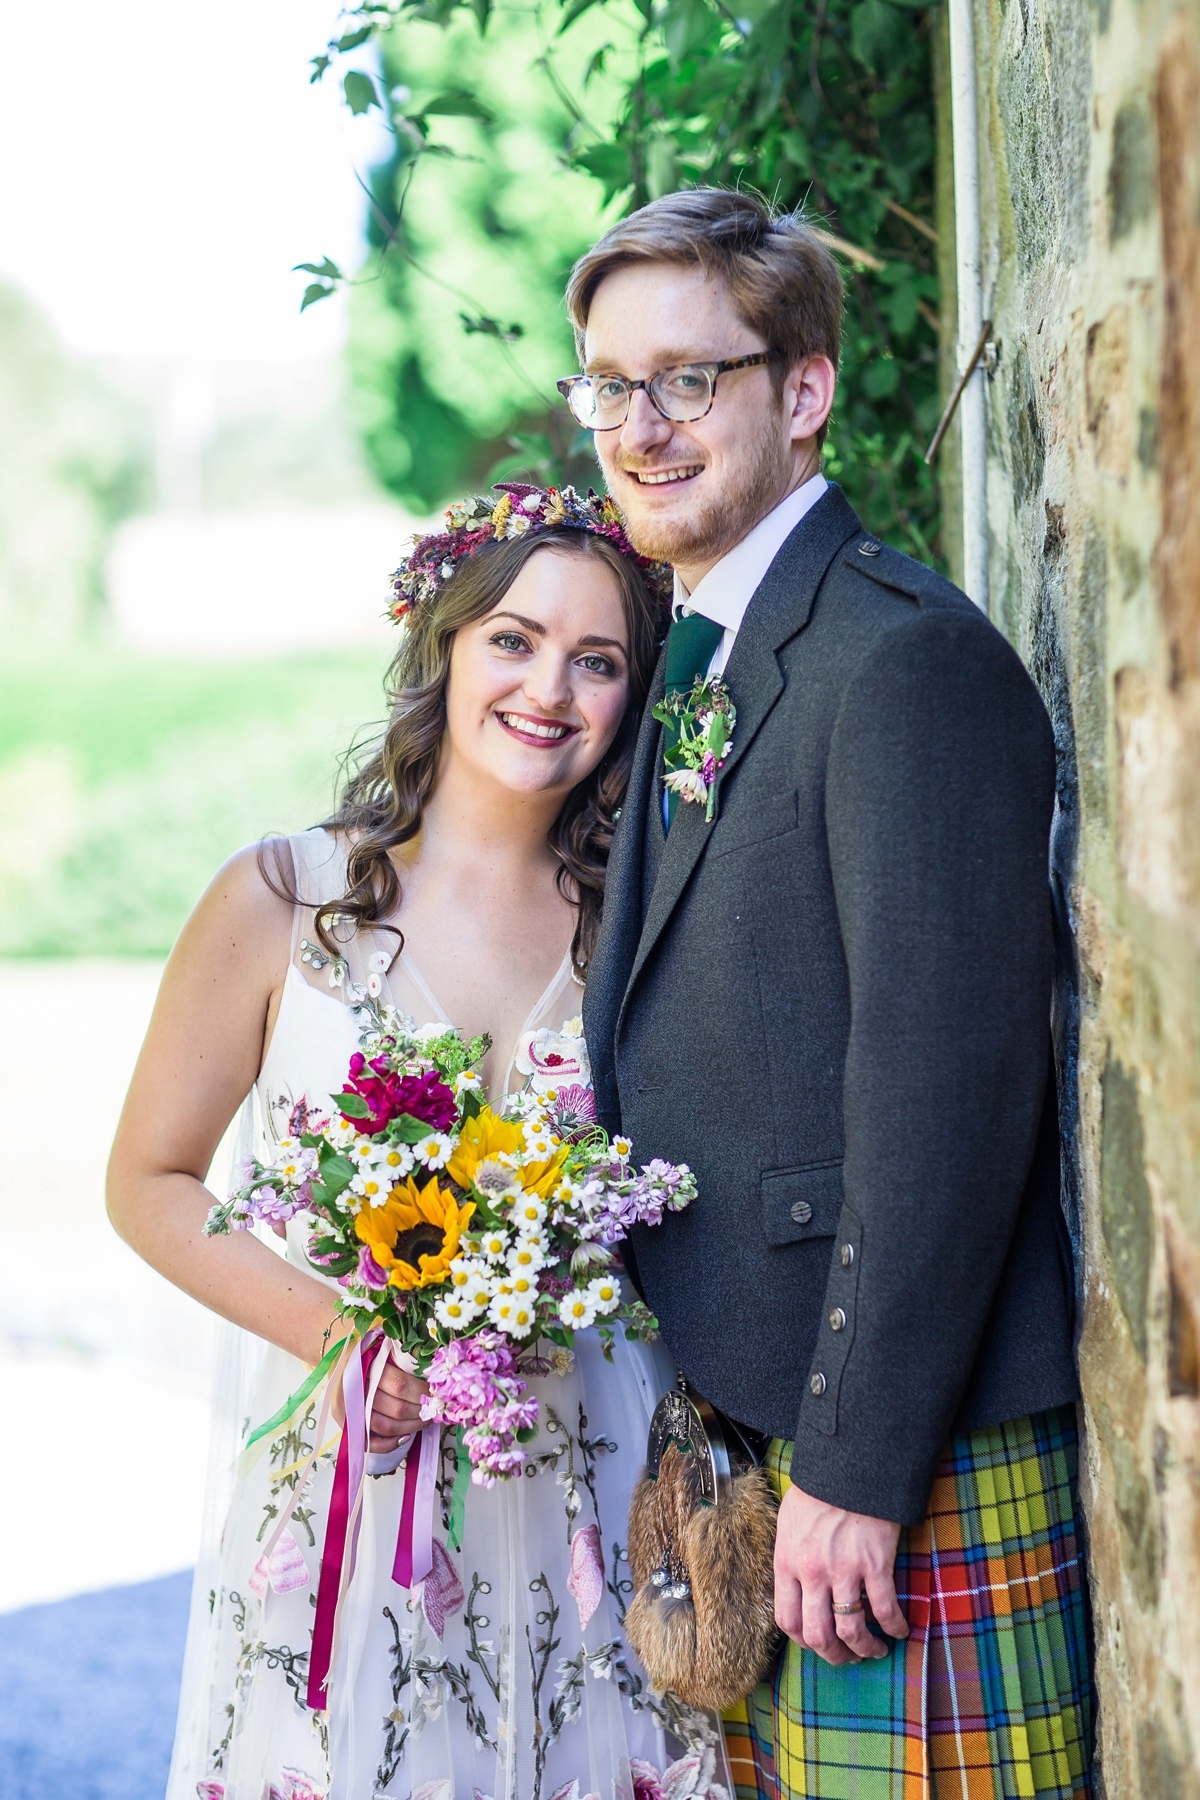 Floral Temperley gown for a colourful outdoor Scottish wedding 30